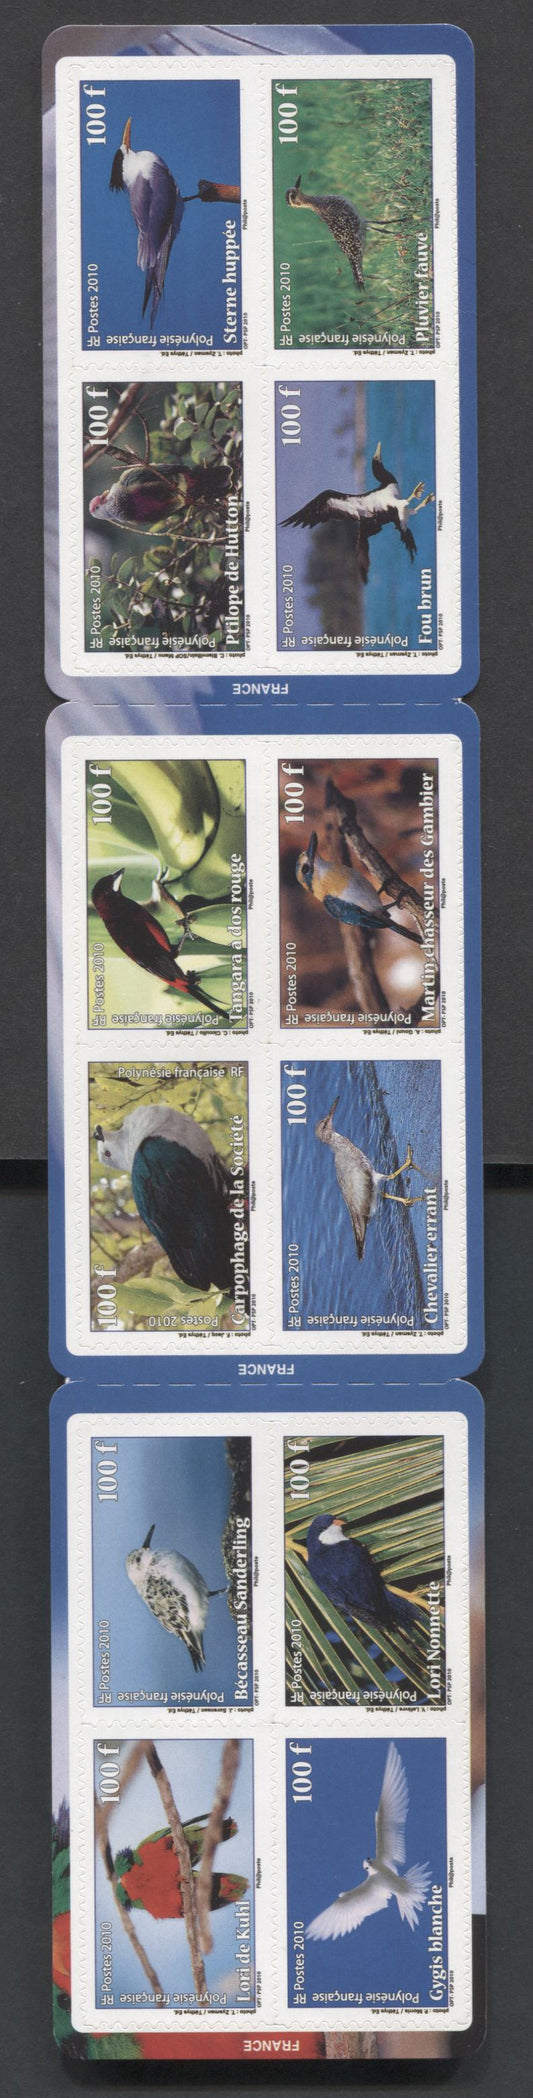 Lot 169 French Polynesia SC#1035-1035 2010 Birds Issue, A VFNH Booklet Pane Of 12, Click on Listing to See ALL Pictures, 2017 Scott Cat. $28